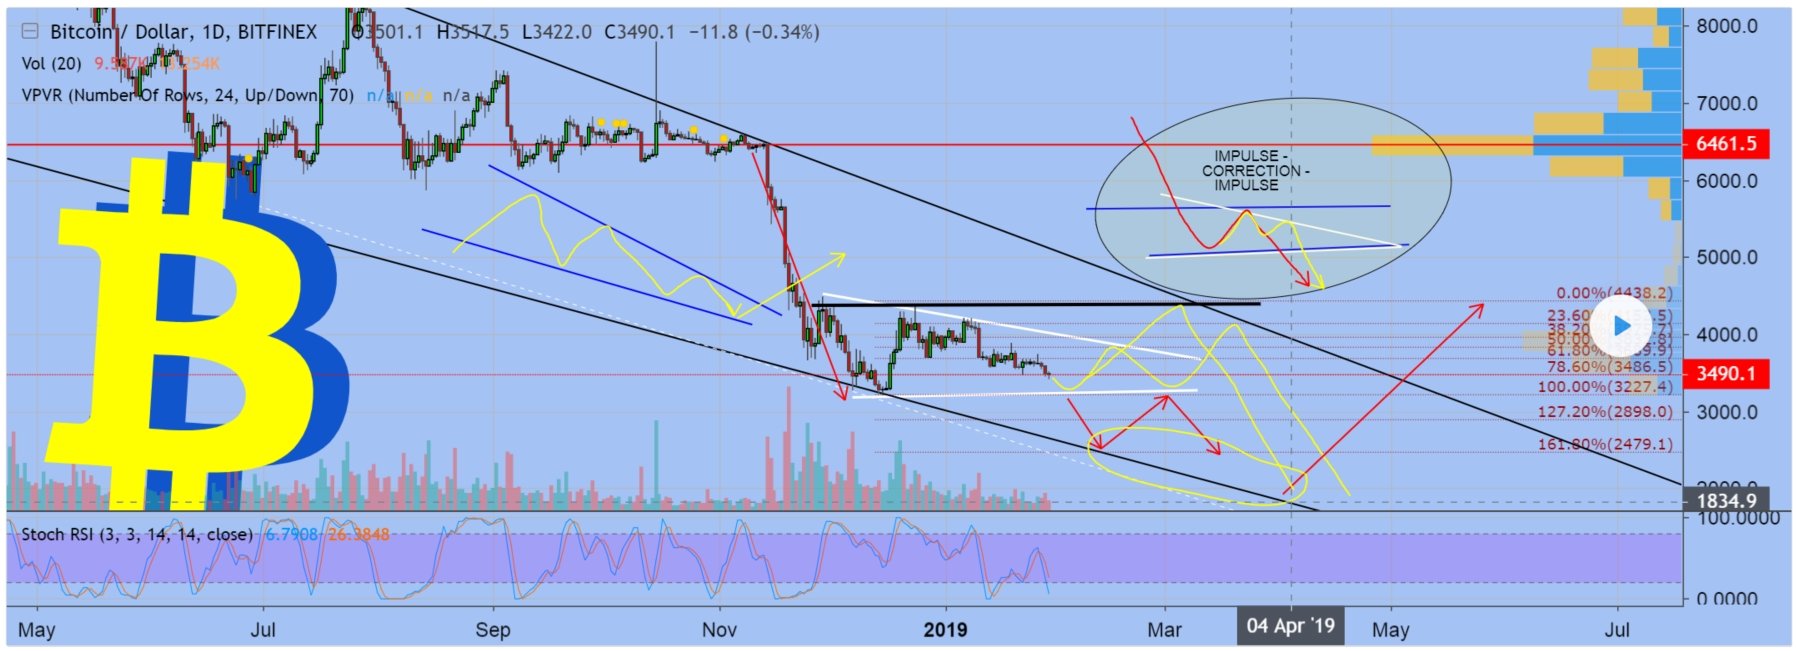 The downtrend is likely to continue until BTC reaches support line